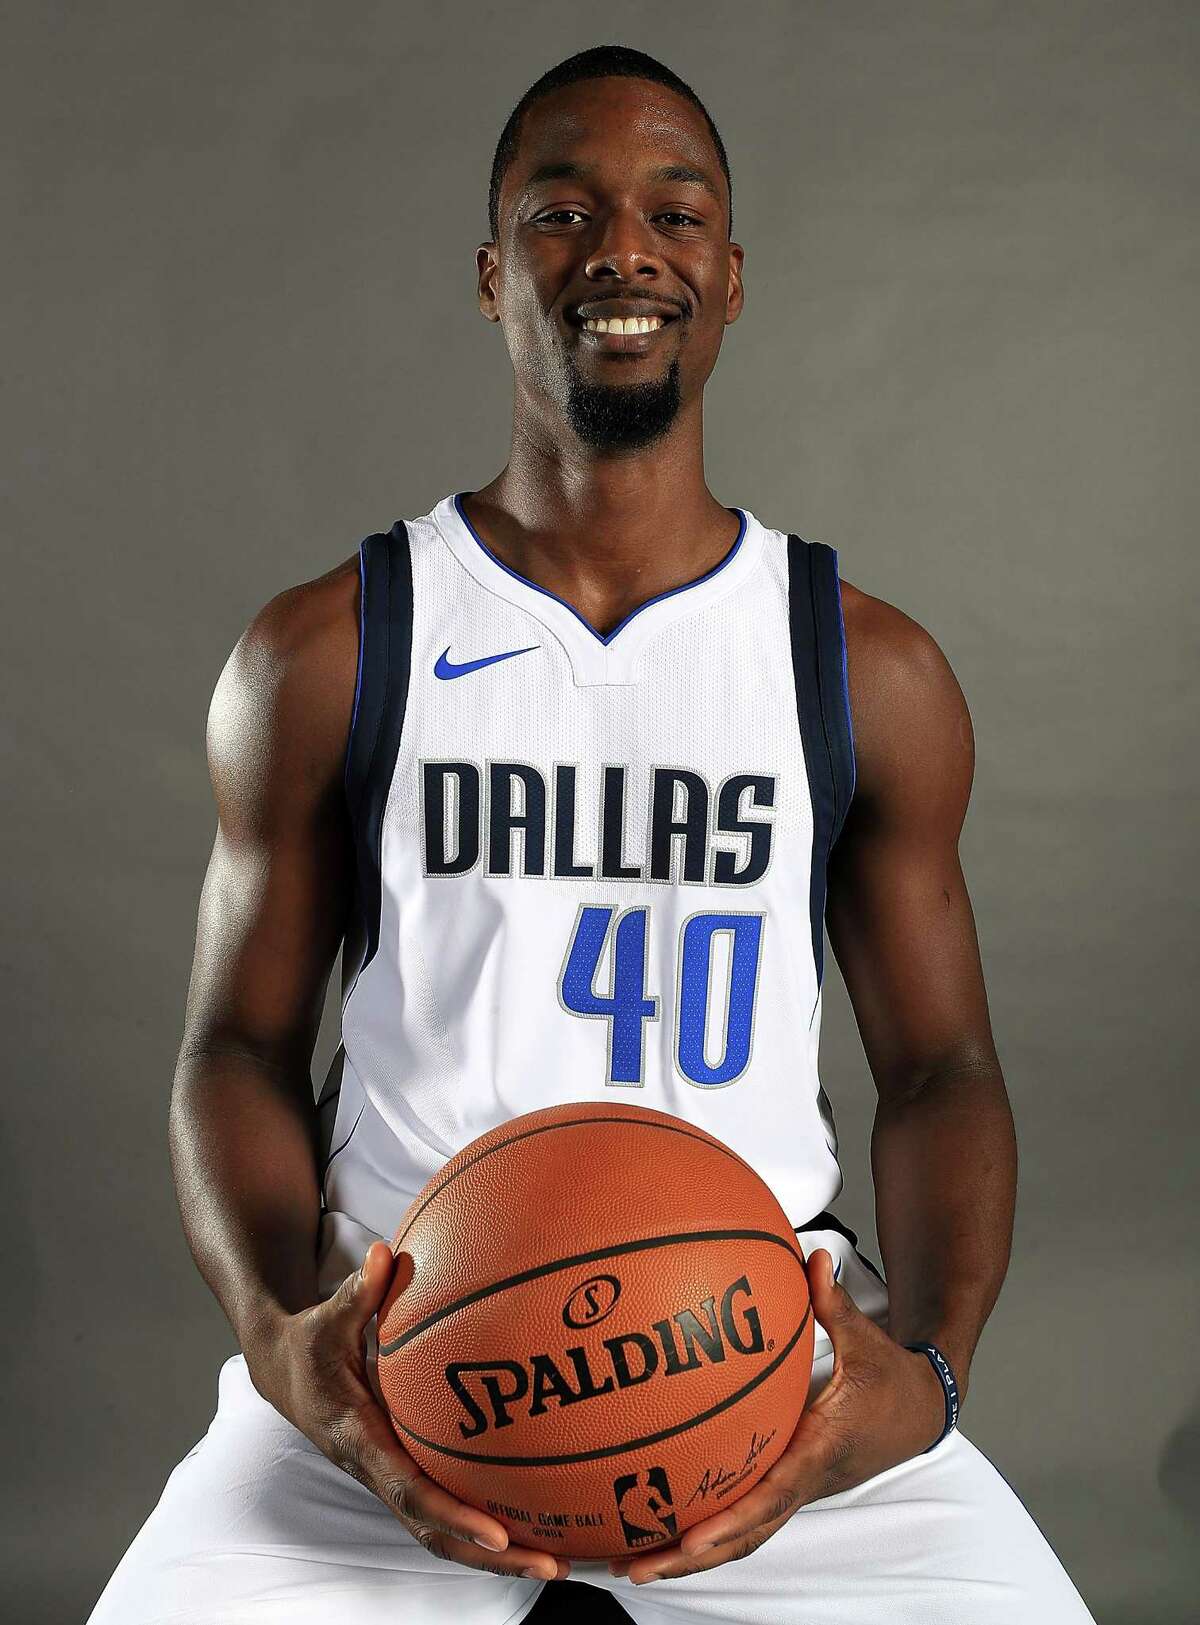 DALLAS, TX - SEPTEMBER 25: Harrison Barnes #40 of the Dallas Mavericks poses for a portrait during Dallas Mavericks media day at American Airlines Center on September 25, 2017 in Dallas, Texas. NOTE TO USER: User expressly acknowledges and agrees that, by downloading and/or using this photograph, user is consenting to the terms and conditions of the Getty Images License Agreement. (Photo by Ronald Martinez/Getty Images) ORG XMIT: 775047912